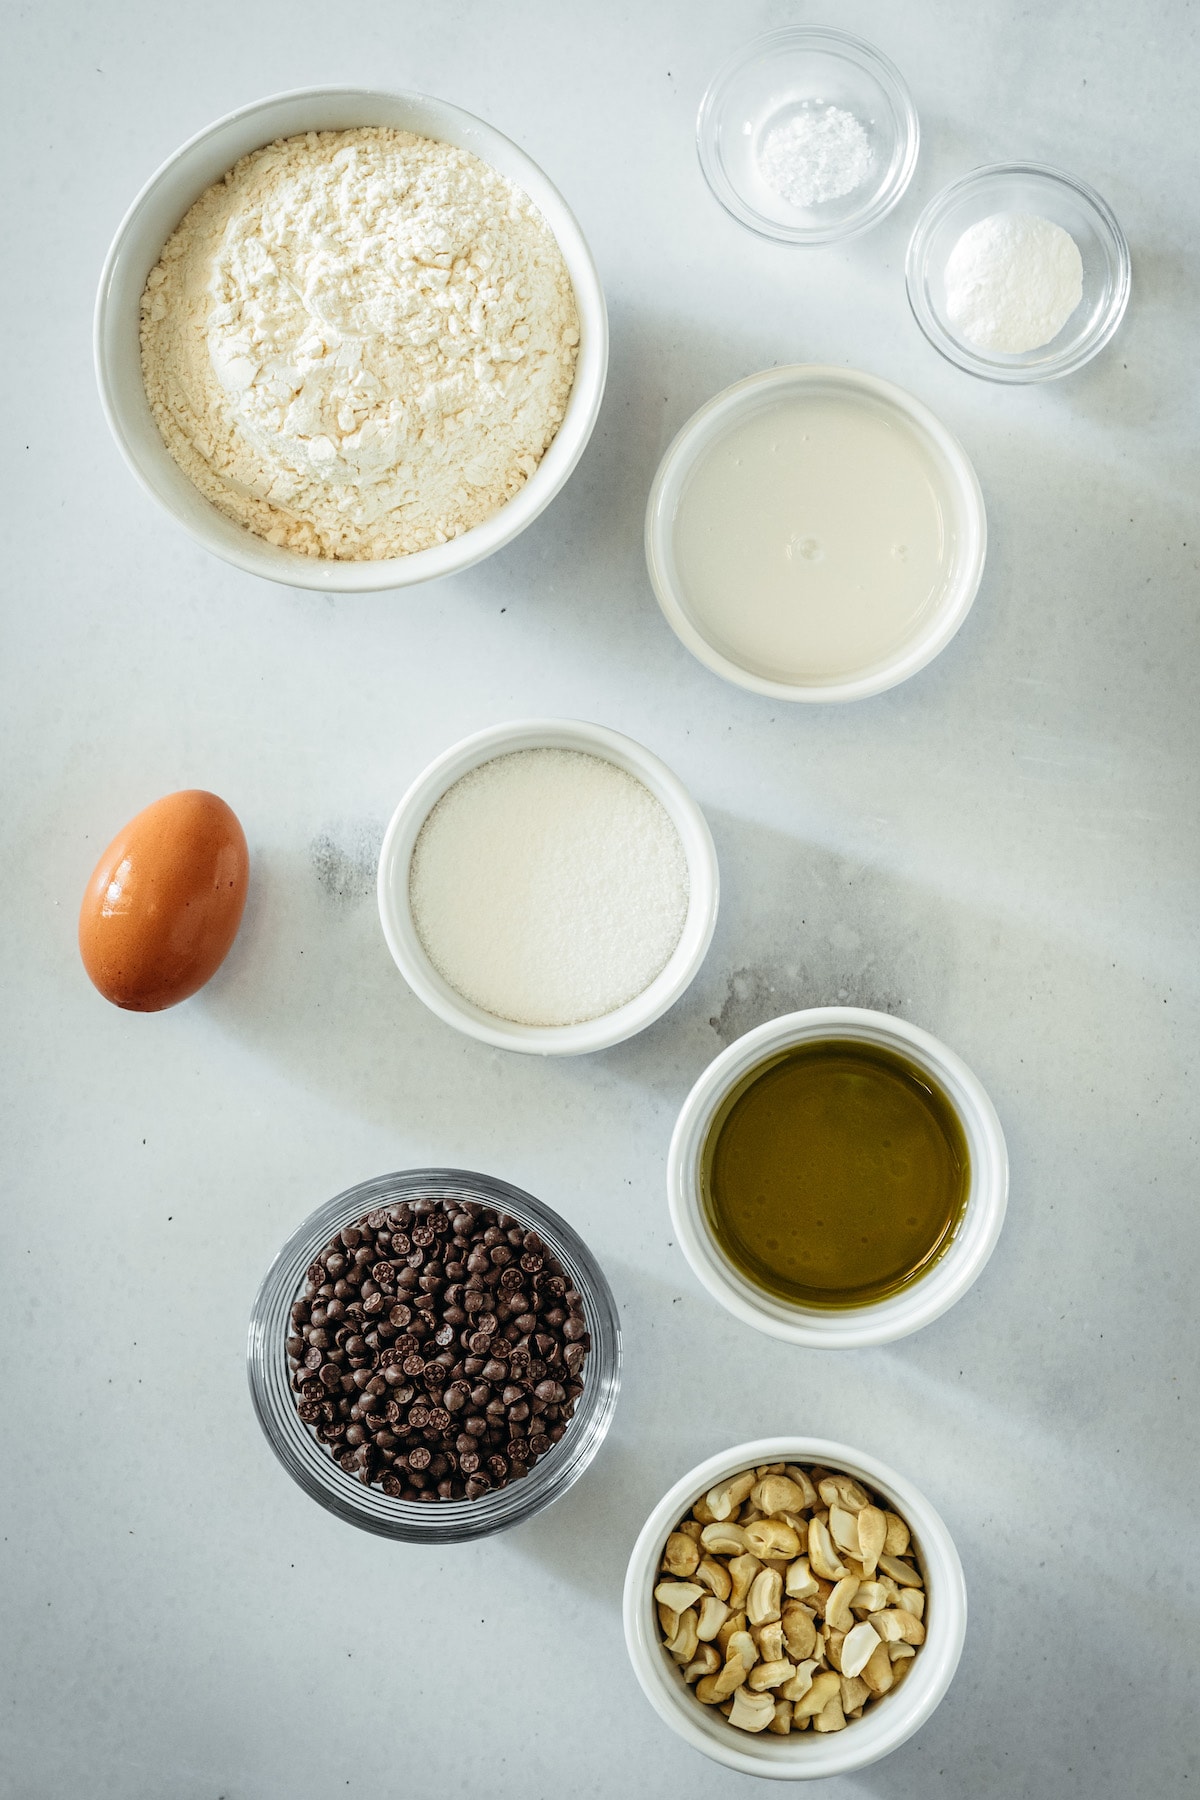 Overhead view of chocolate chip cashew bread ingredients